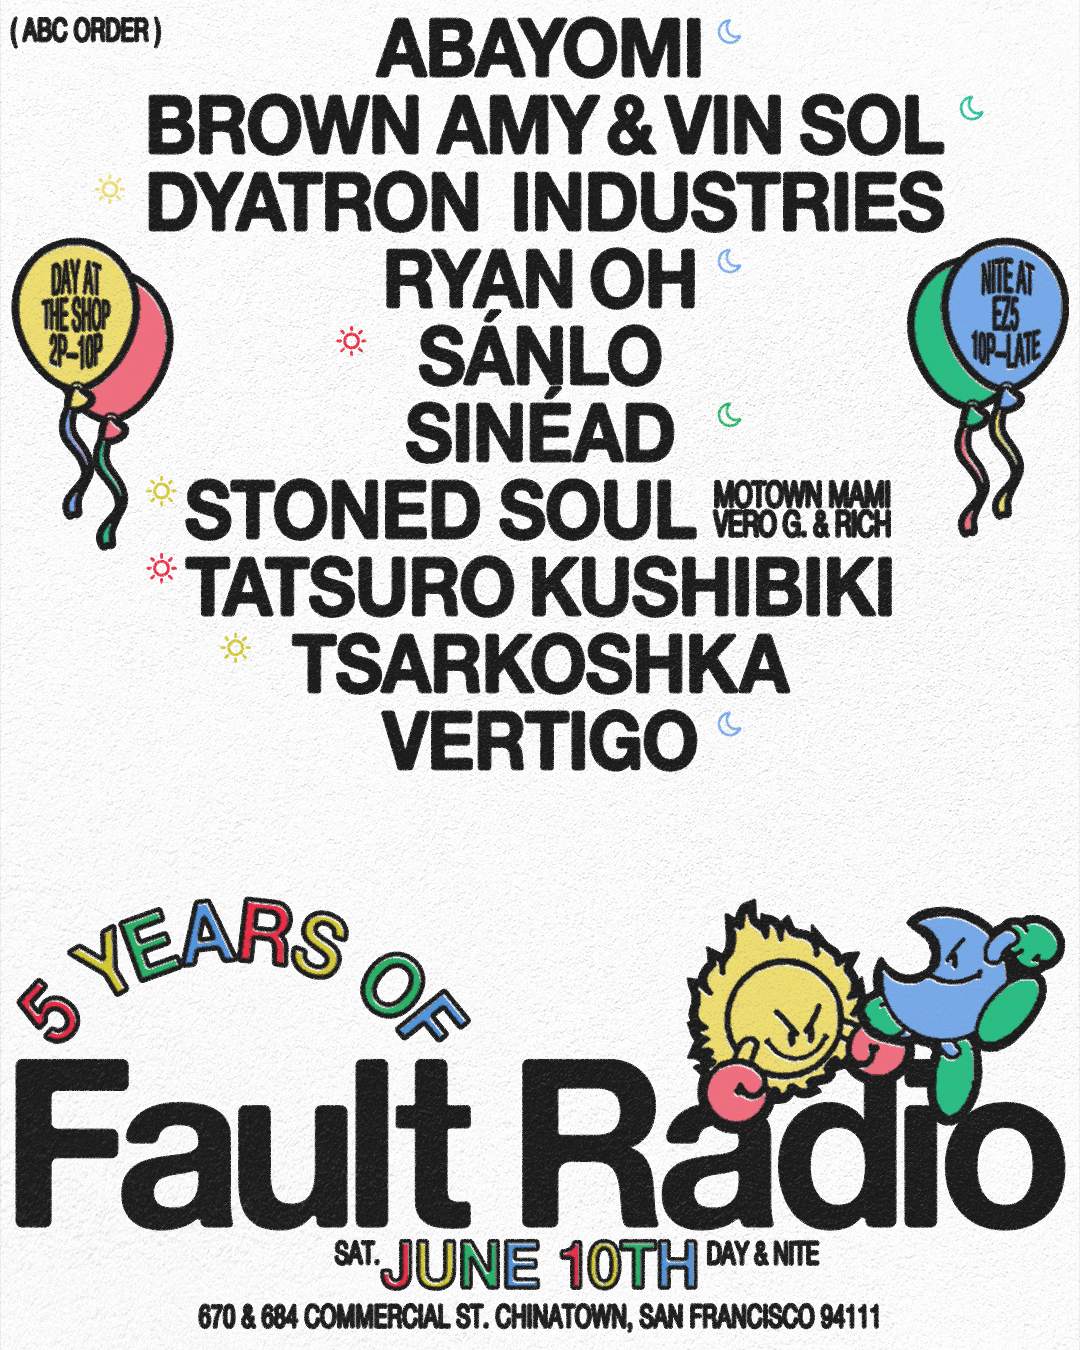 Five Years of Fault Radio - フライヤー裏